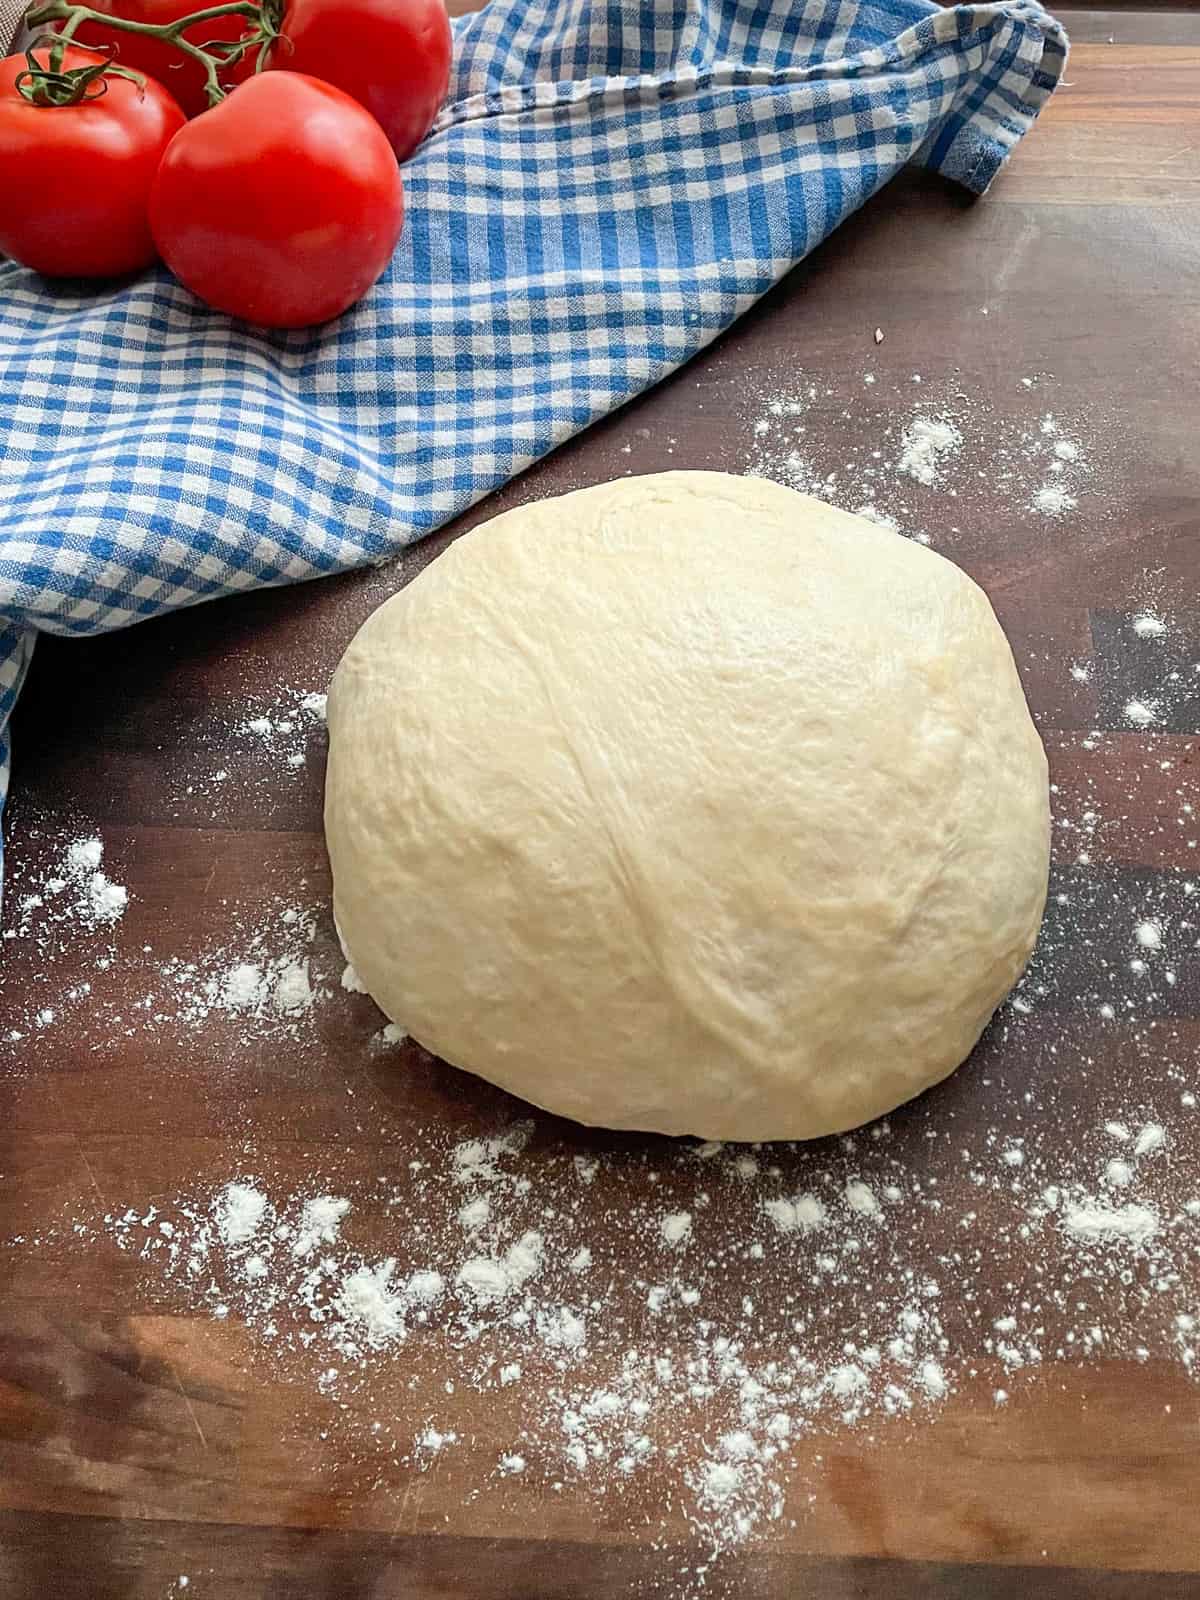 fresh homemade pizza dough sitting on top of a lightly floured cutting board next to a blue and white checkered tea towel with tomatoes on top.